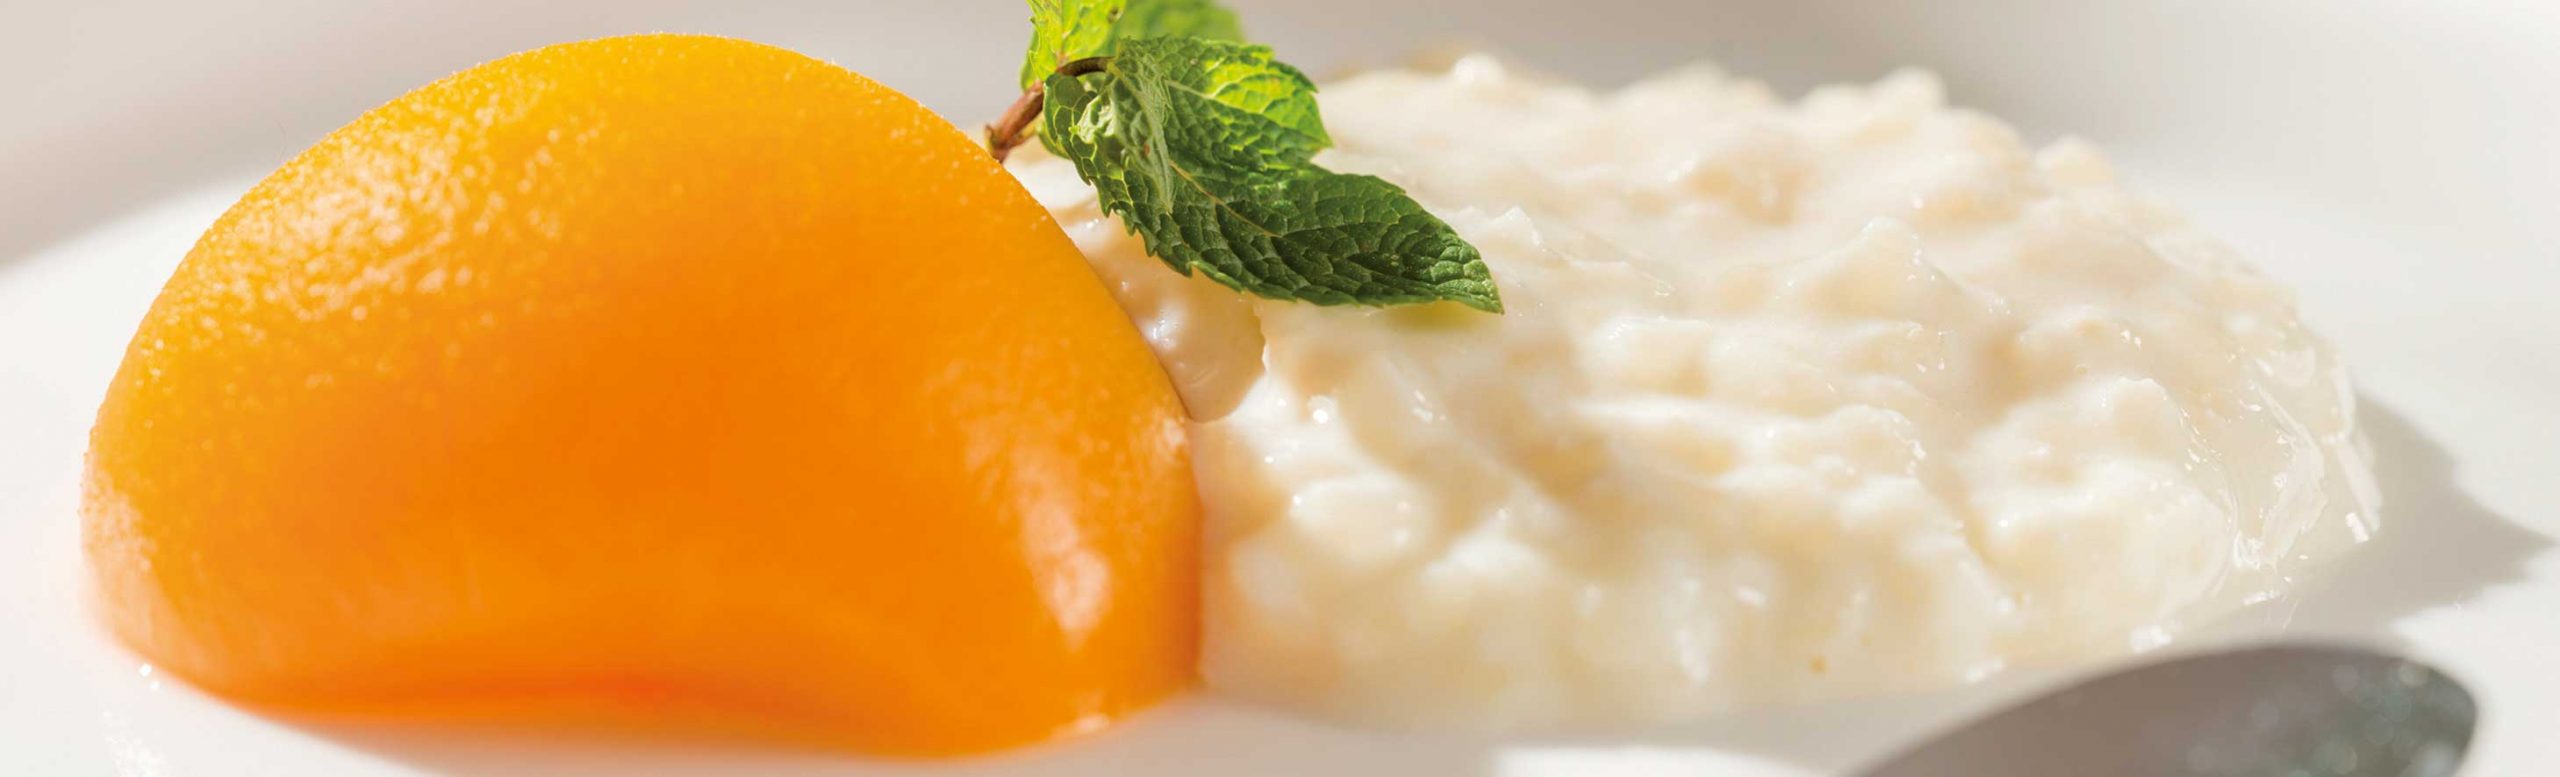 Rice pudding with peaches